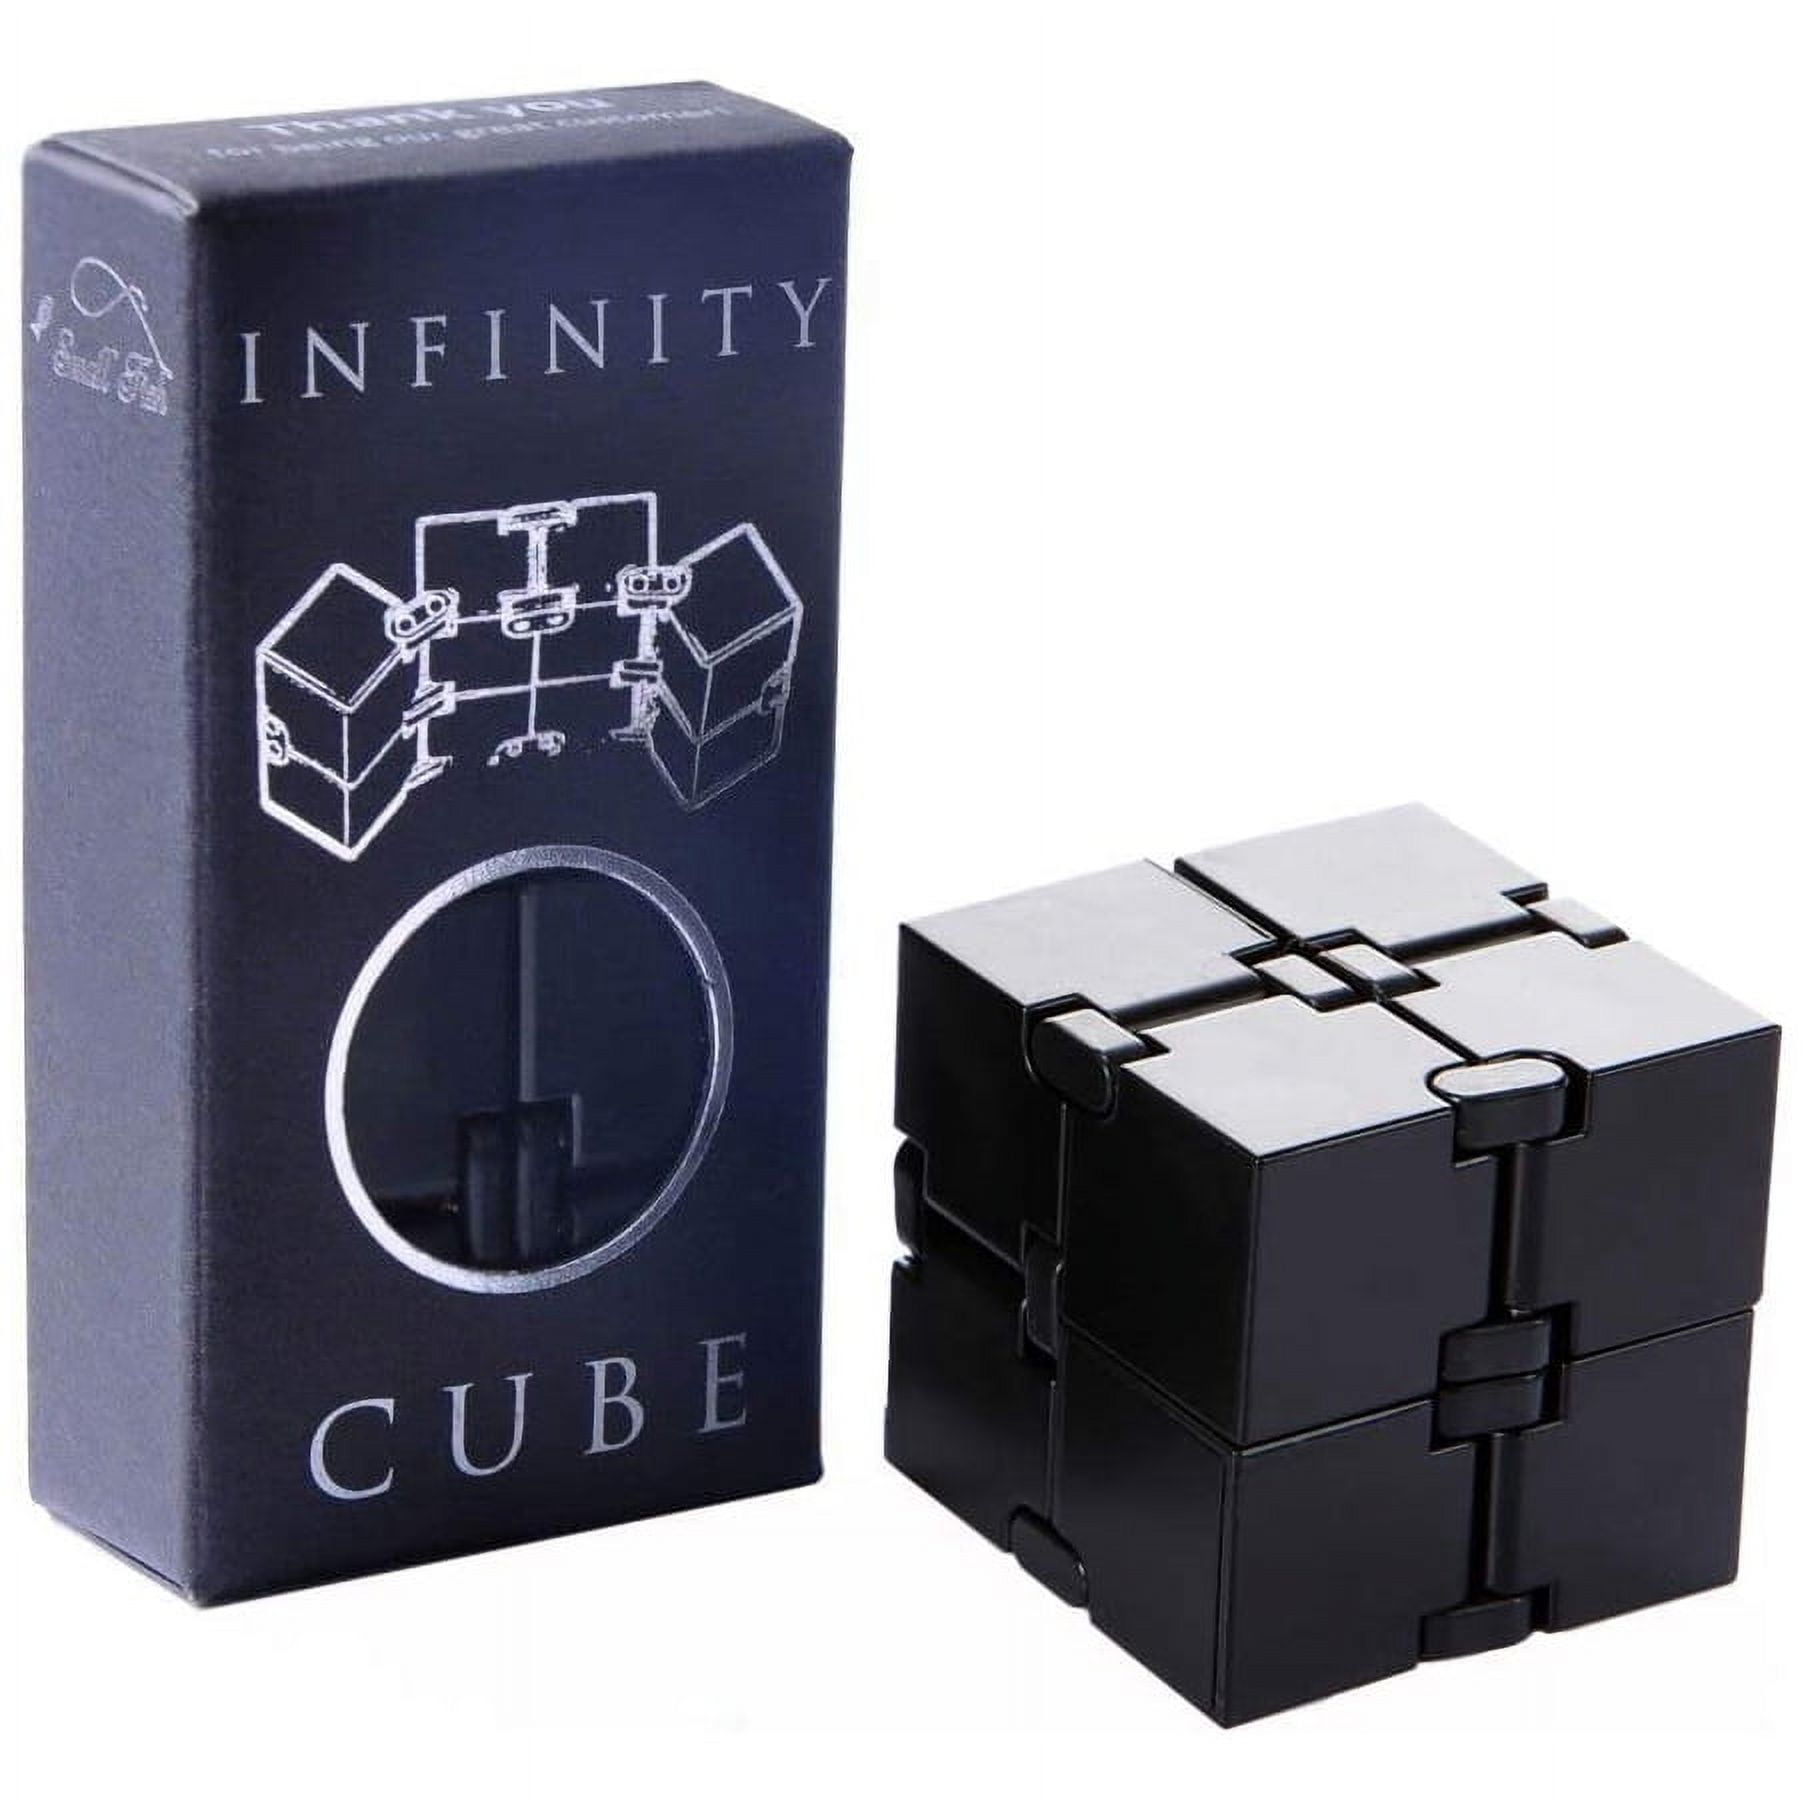  Blackbox Anti-Star Cube - Helps Soothe Anxiety and Stress for  Children and Adults - Special Design for People with ADD, Desperation and  Anxiety - Anti-Anxiety Cube - Black : Juguetes y Juegos